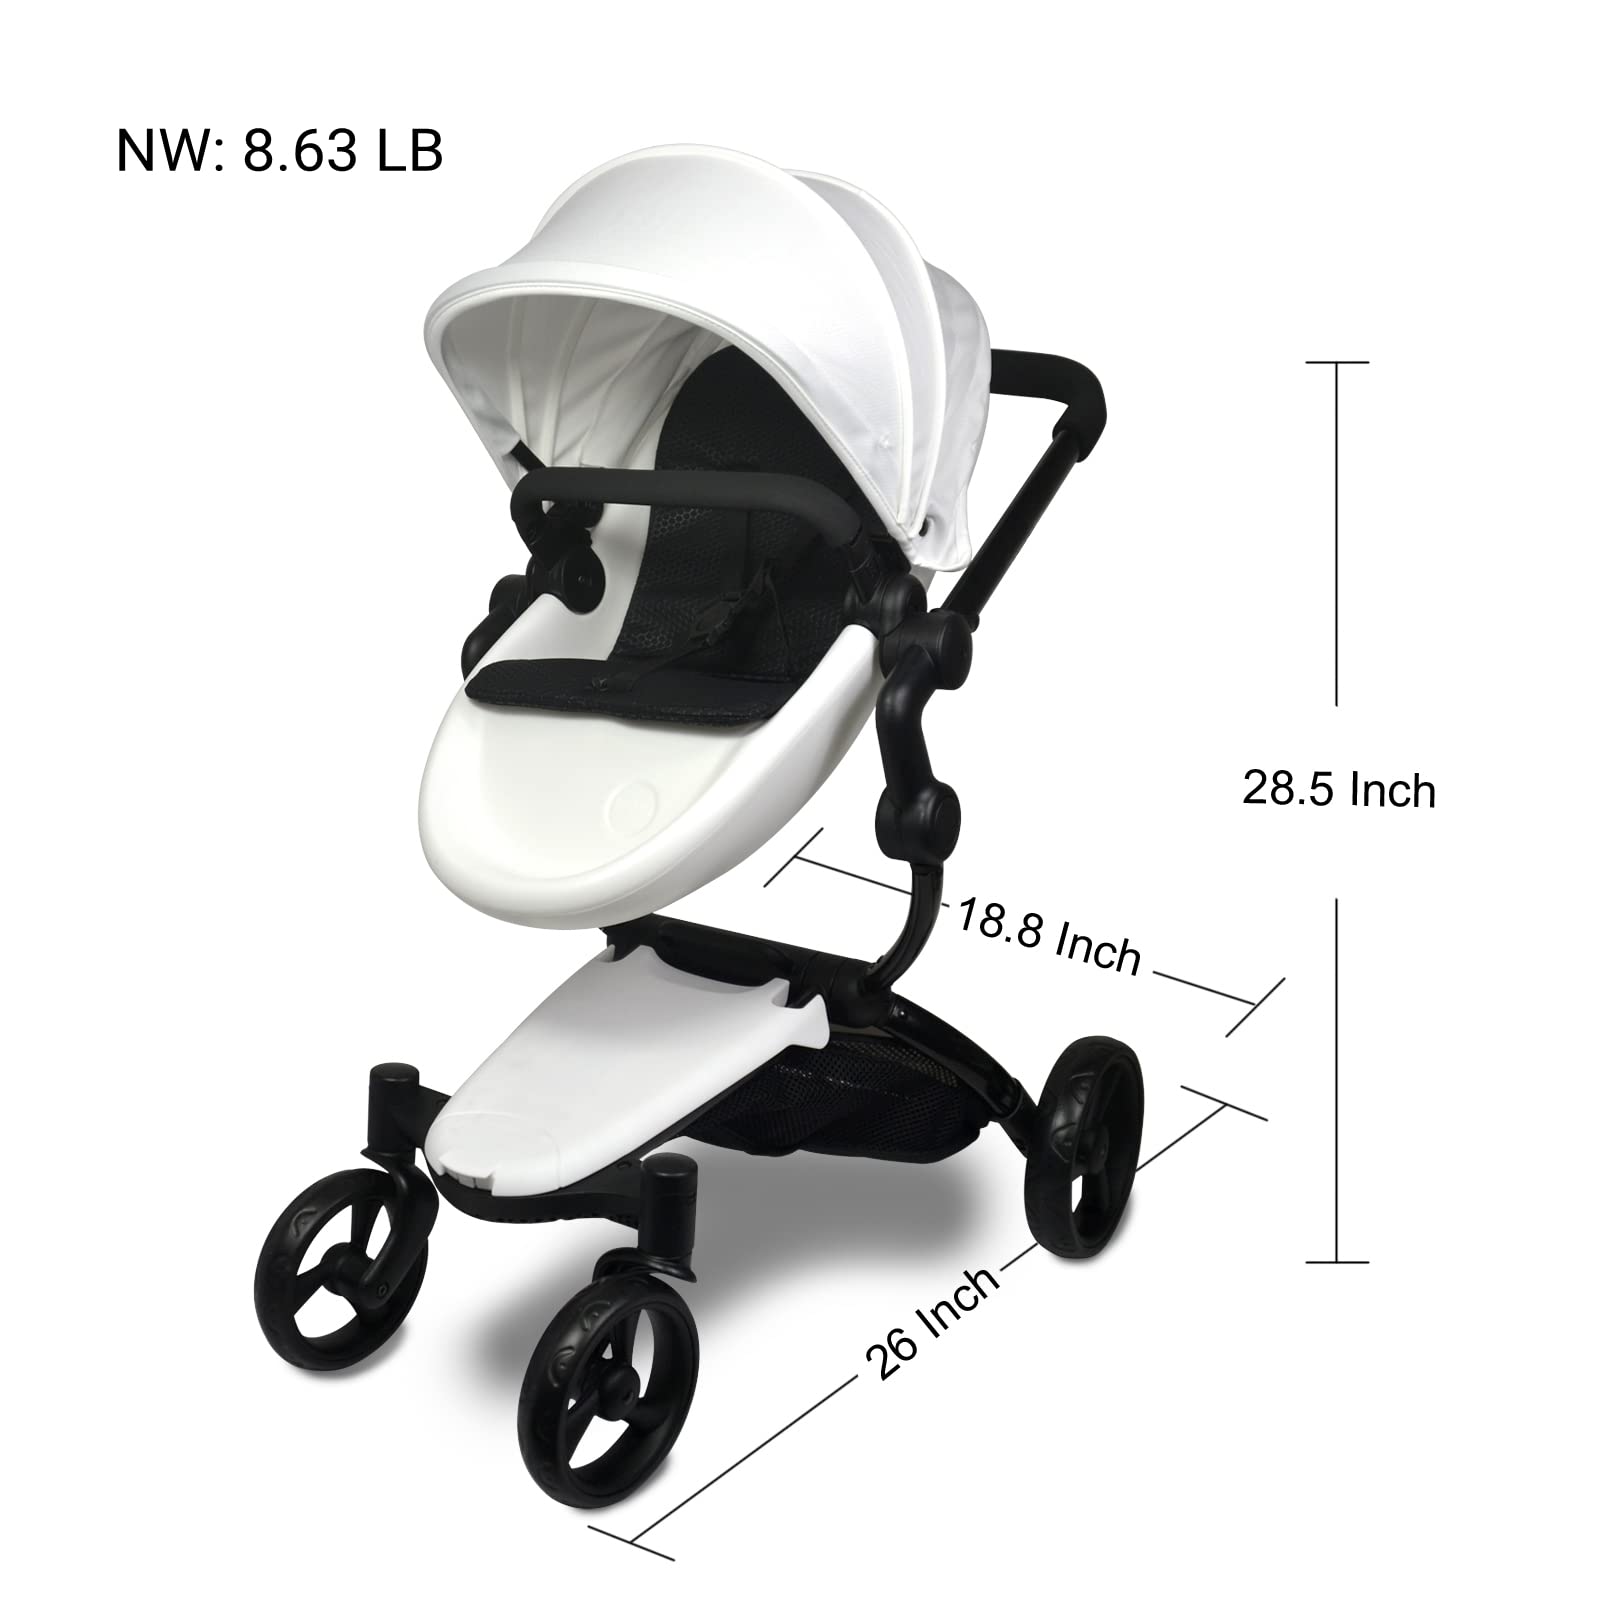 Anivia Luxury Baby Doll Stroller for 18